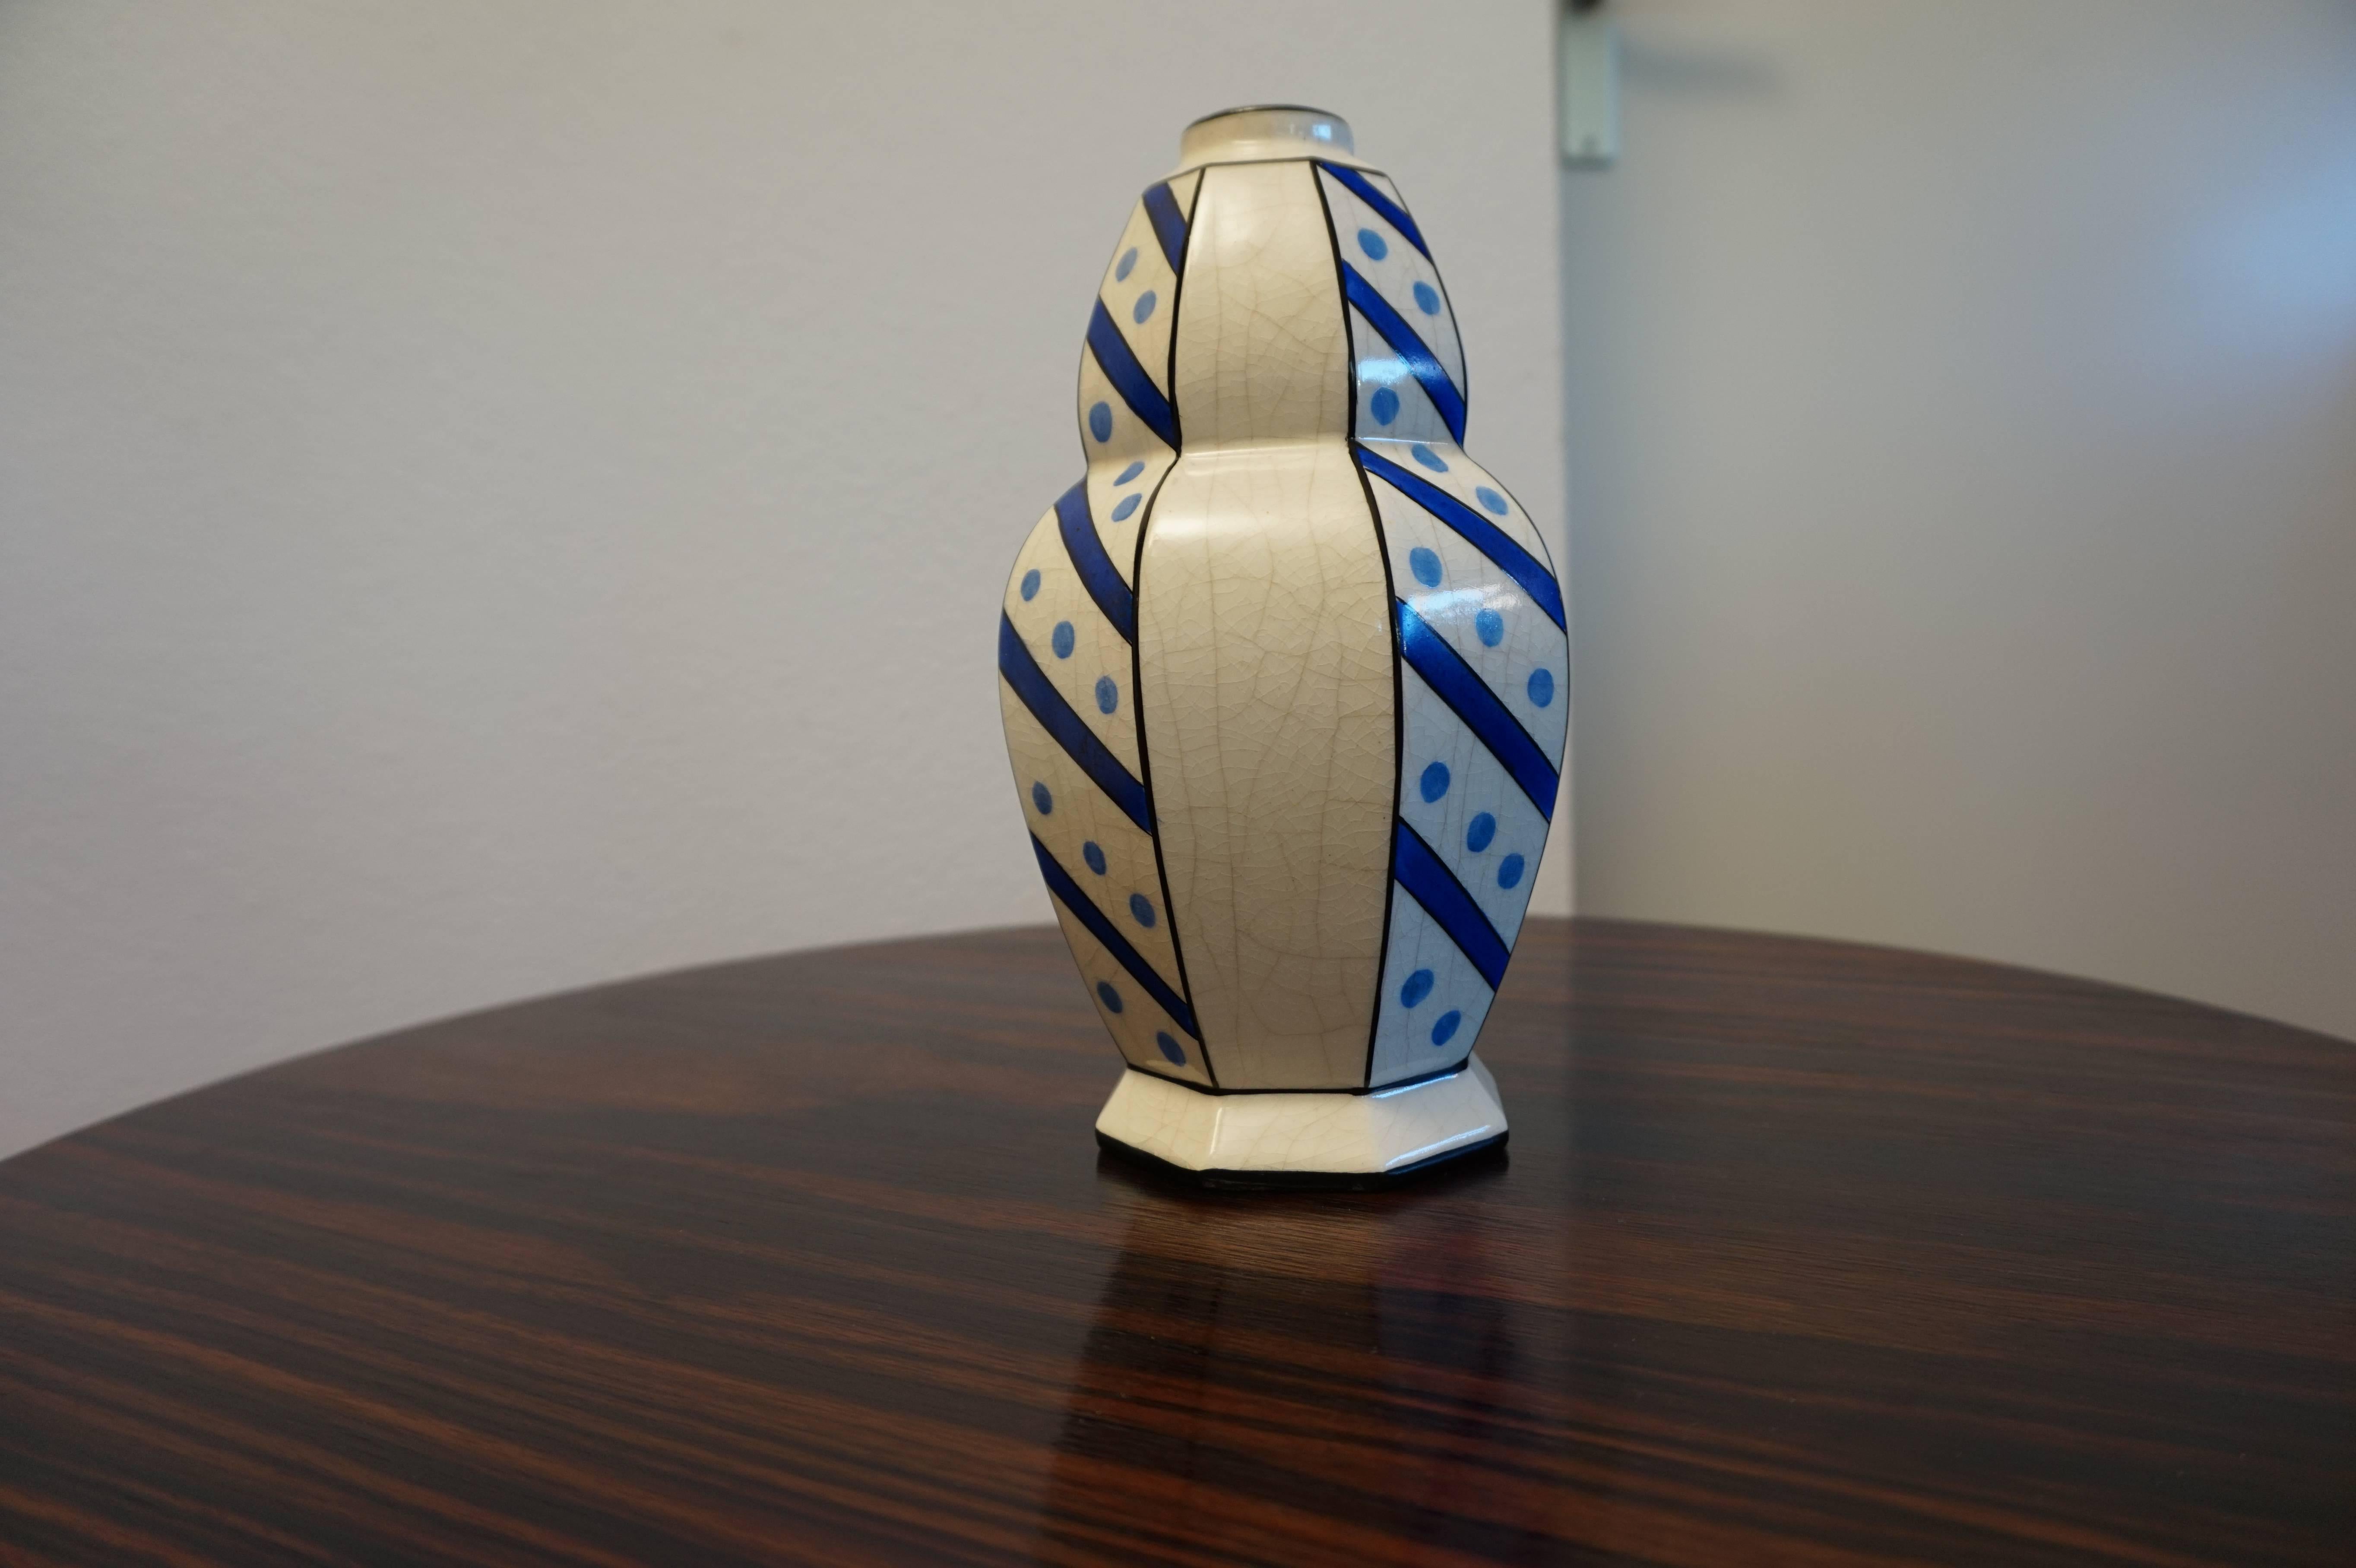 Belgian Glazed Art Deco Design Vase Attributed to Charles Catteau Blue Dotts and Stripes For Sale